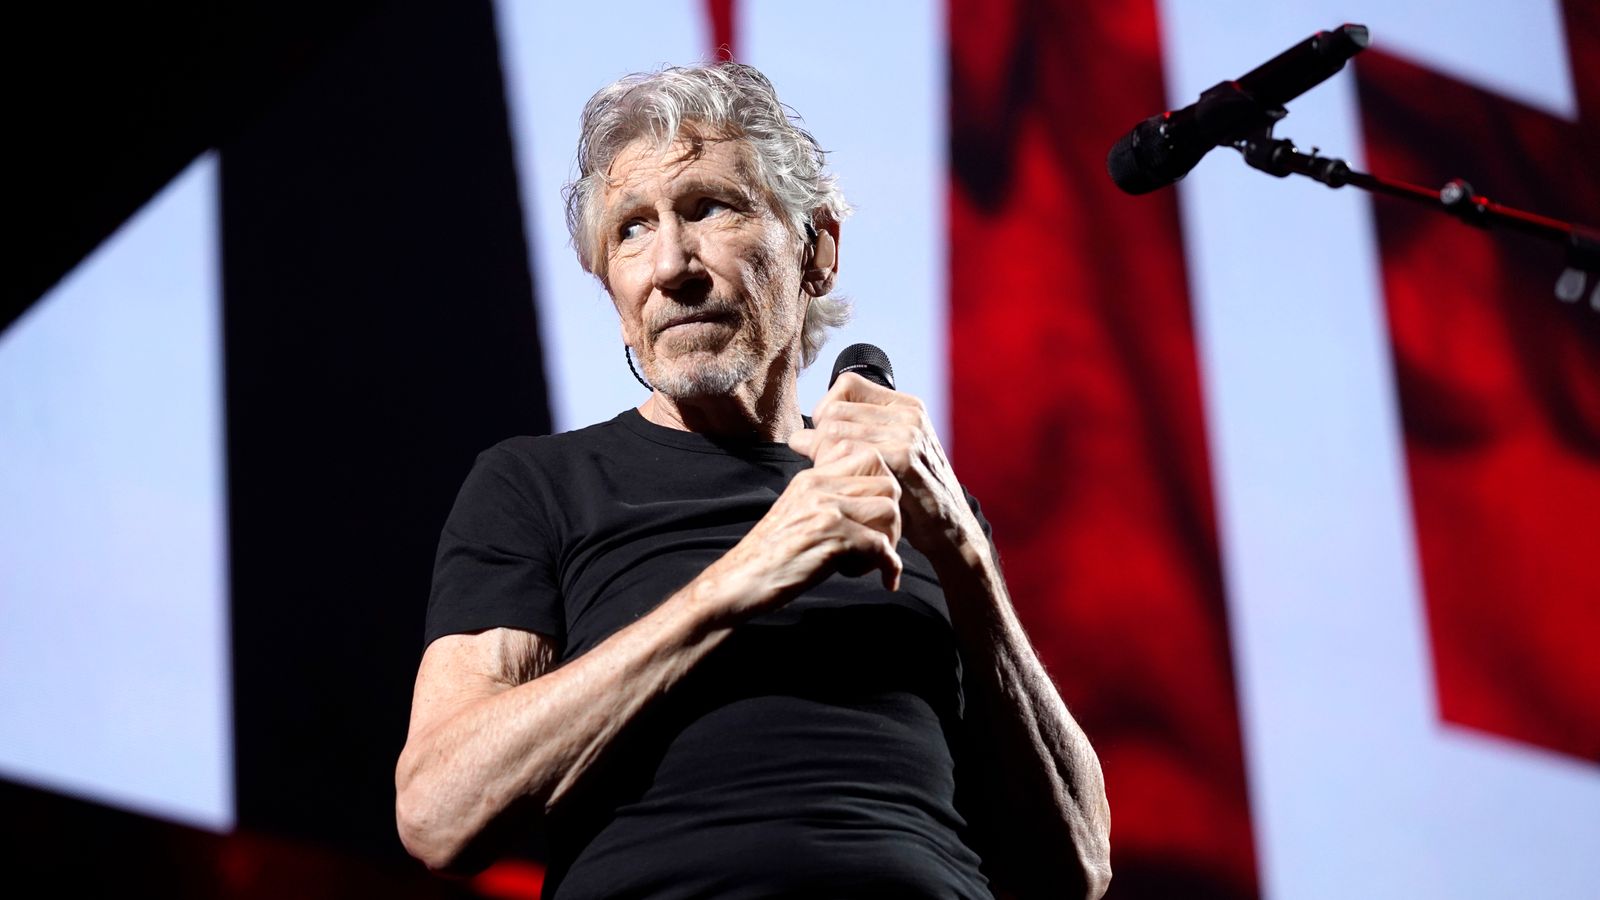 Pink Floyd star Roger Waters addresses UN at Russia's request - after denying 'incendiary' claims in row with ex-bandmate